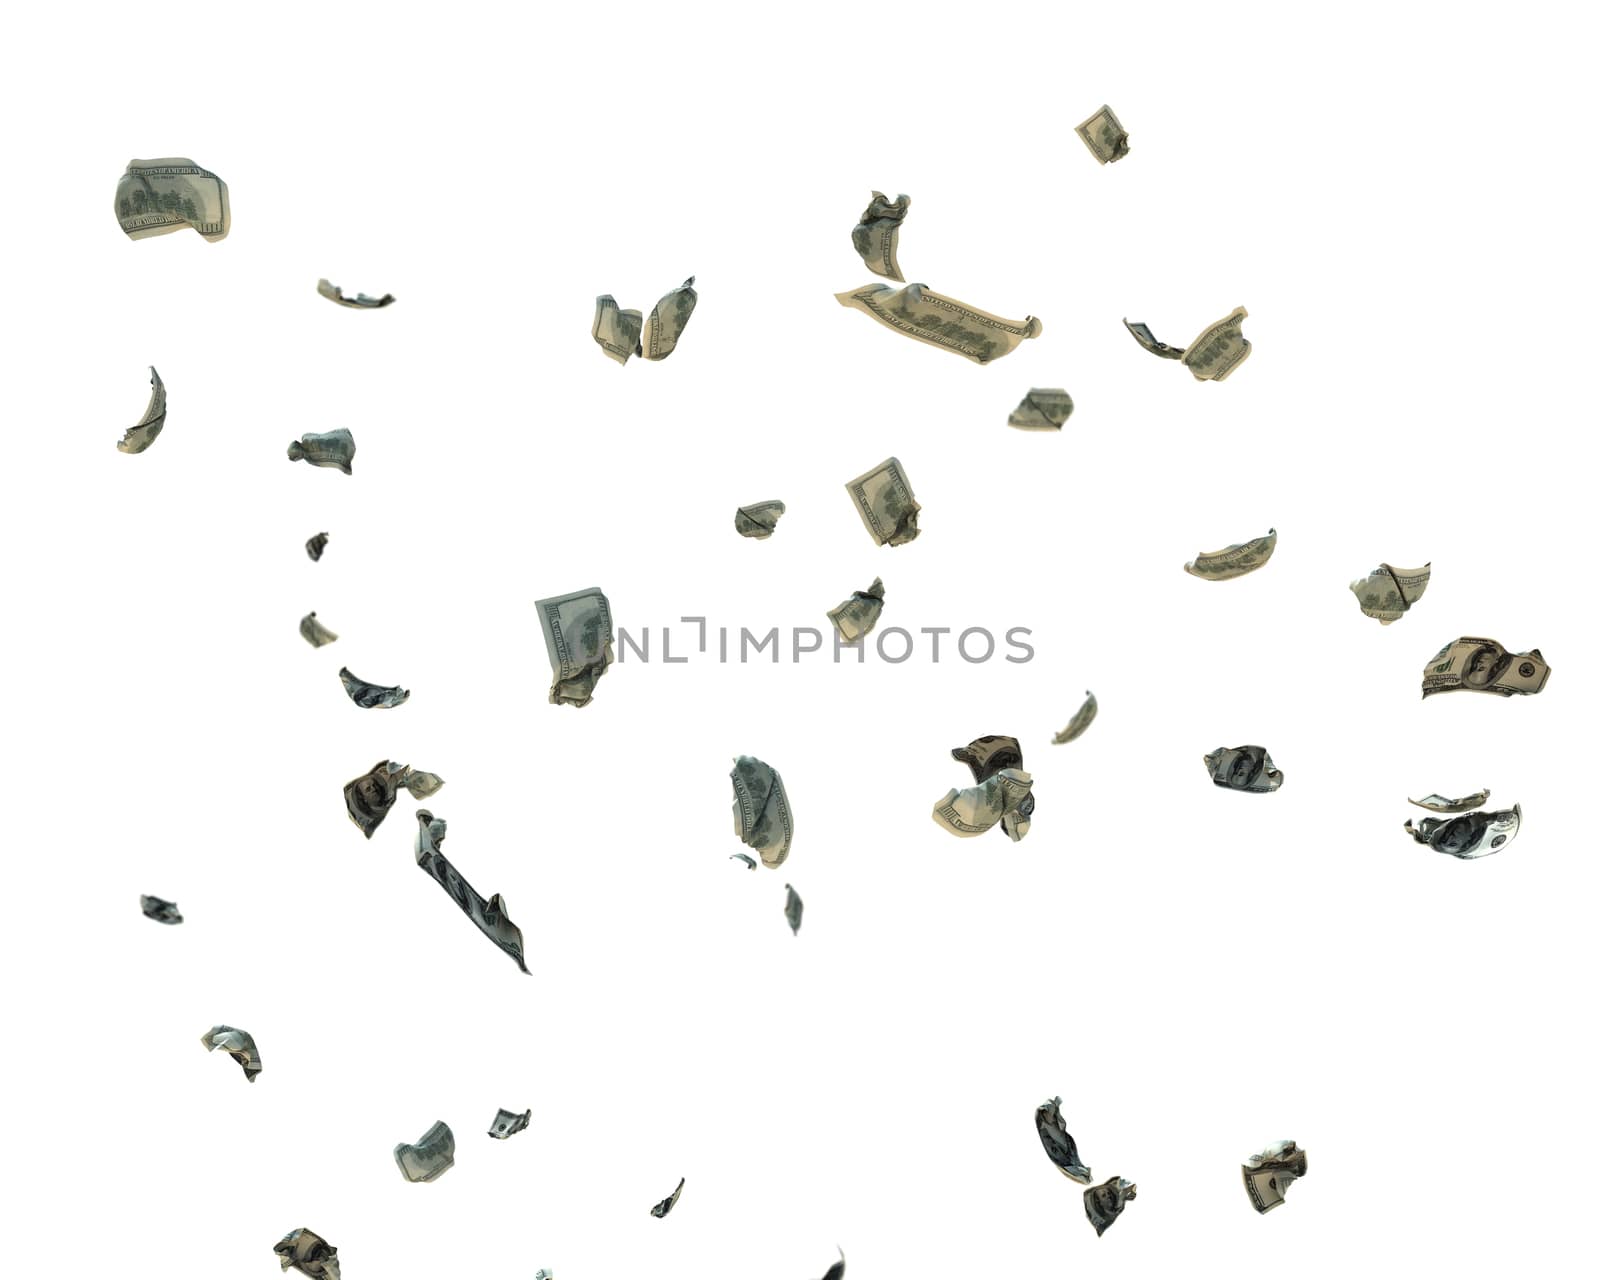 100 US Dollar Crumpled Banknotes flying, against white, clipping by pixelfootage